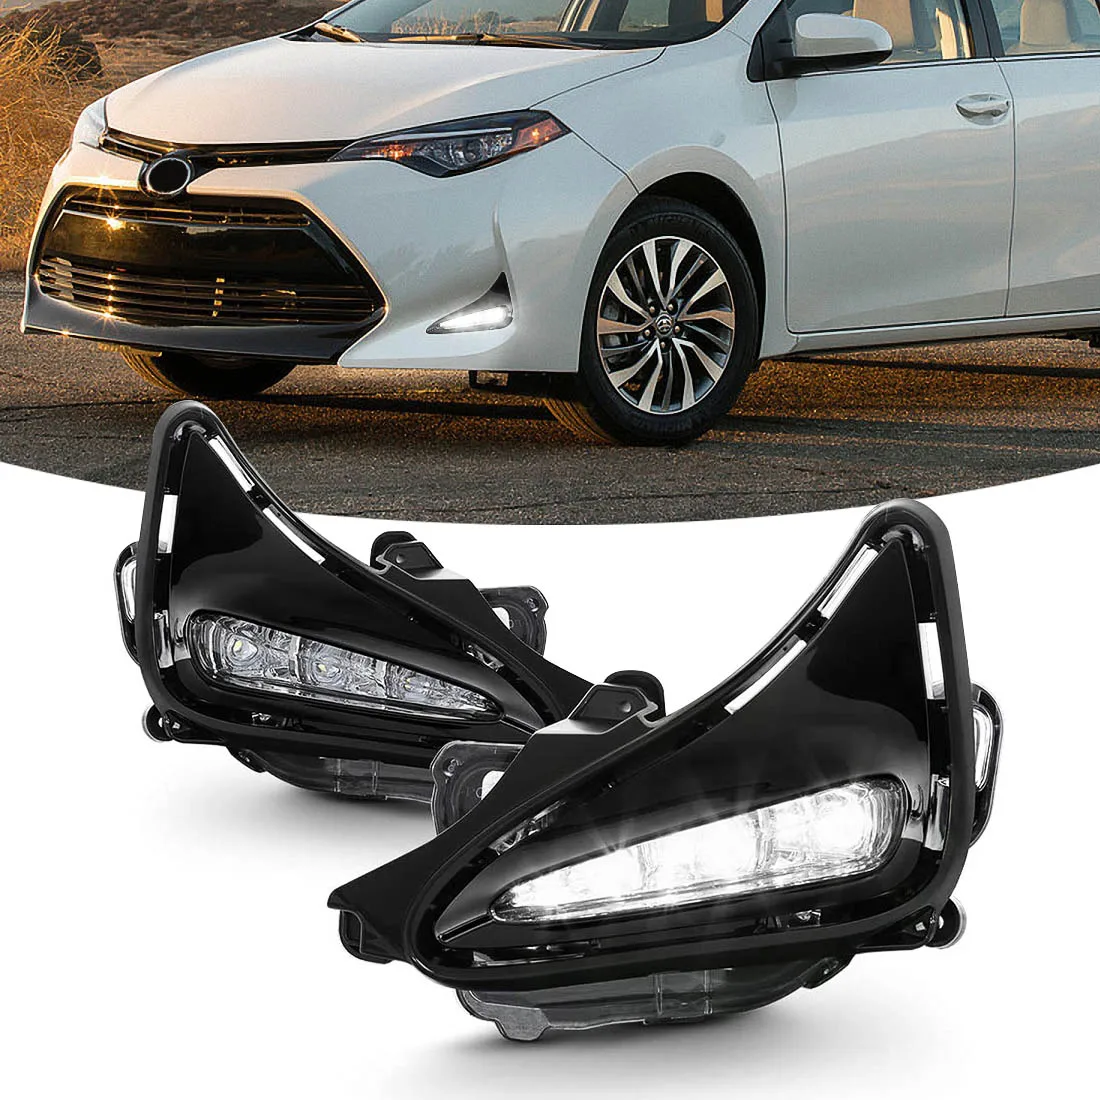 LED DRL Fog Lamp For Toyota Corolla LE/XLE 2017 2018 2019 Daytime Running Lights Bumper Driving Ry Wires Switch Wateproof